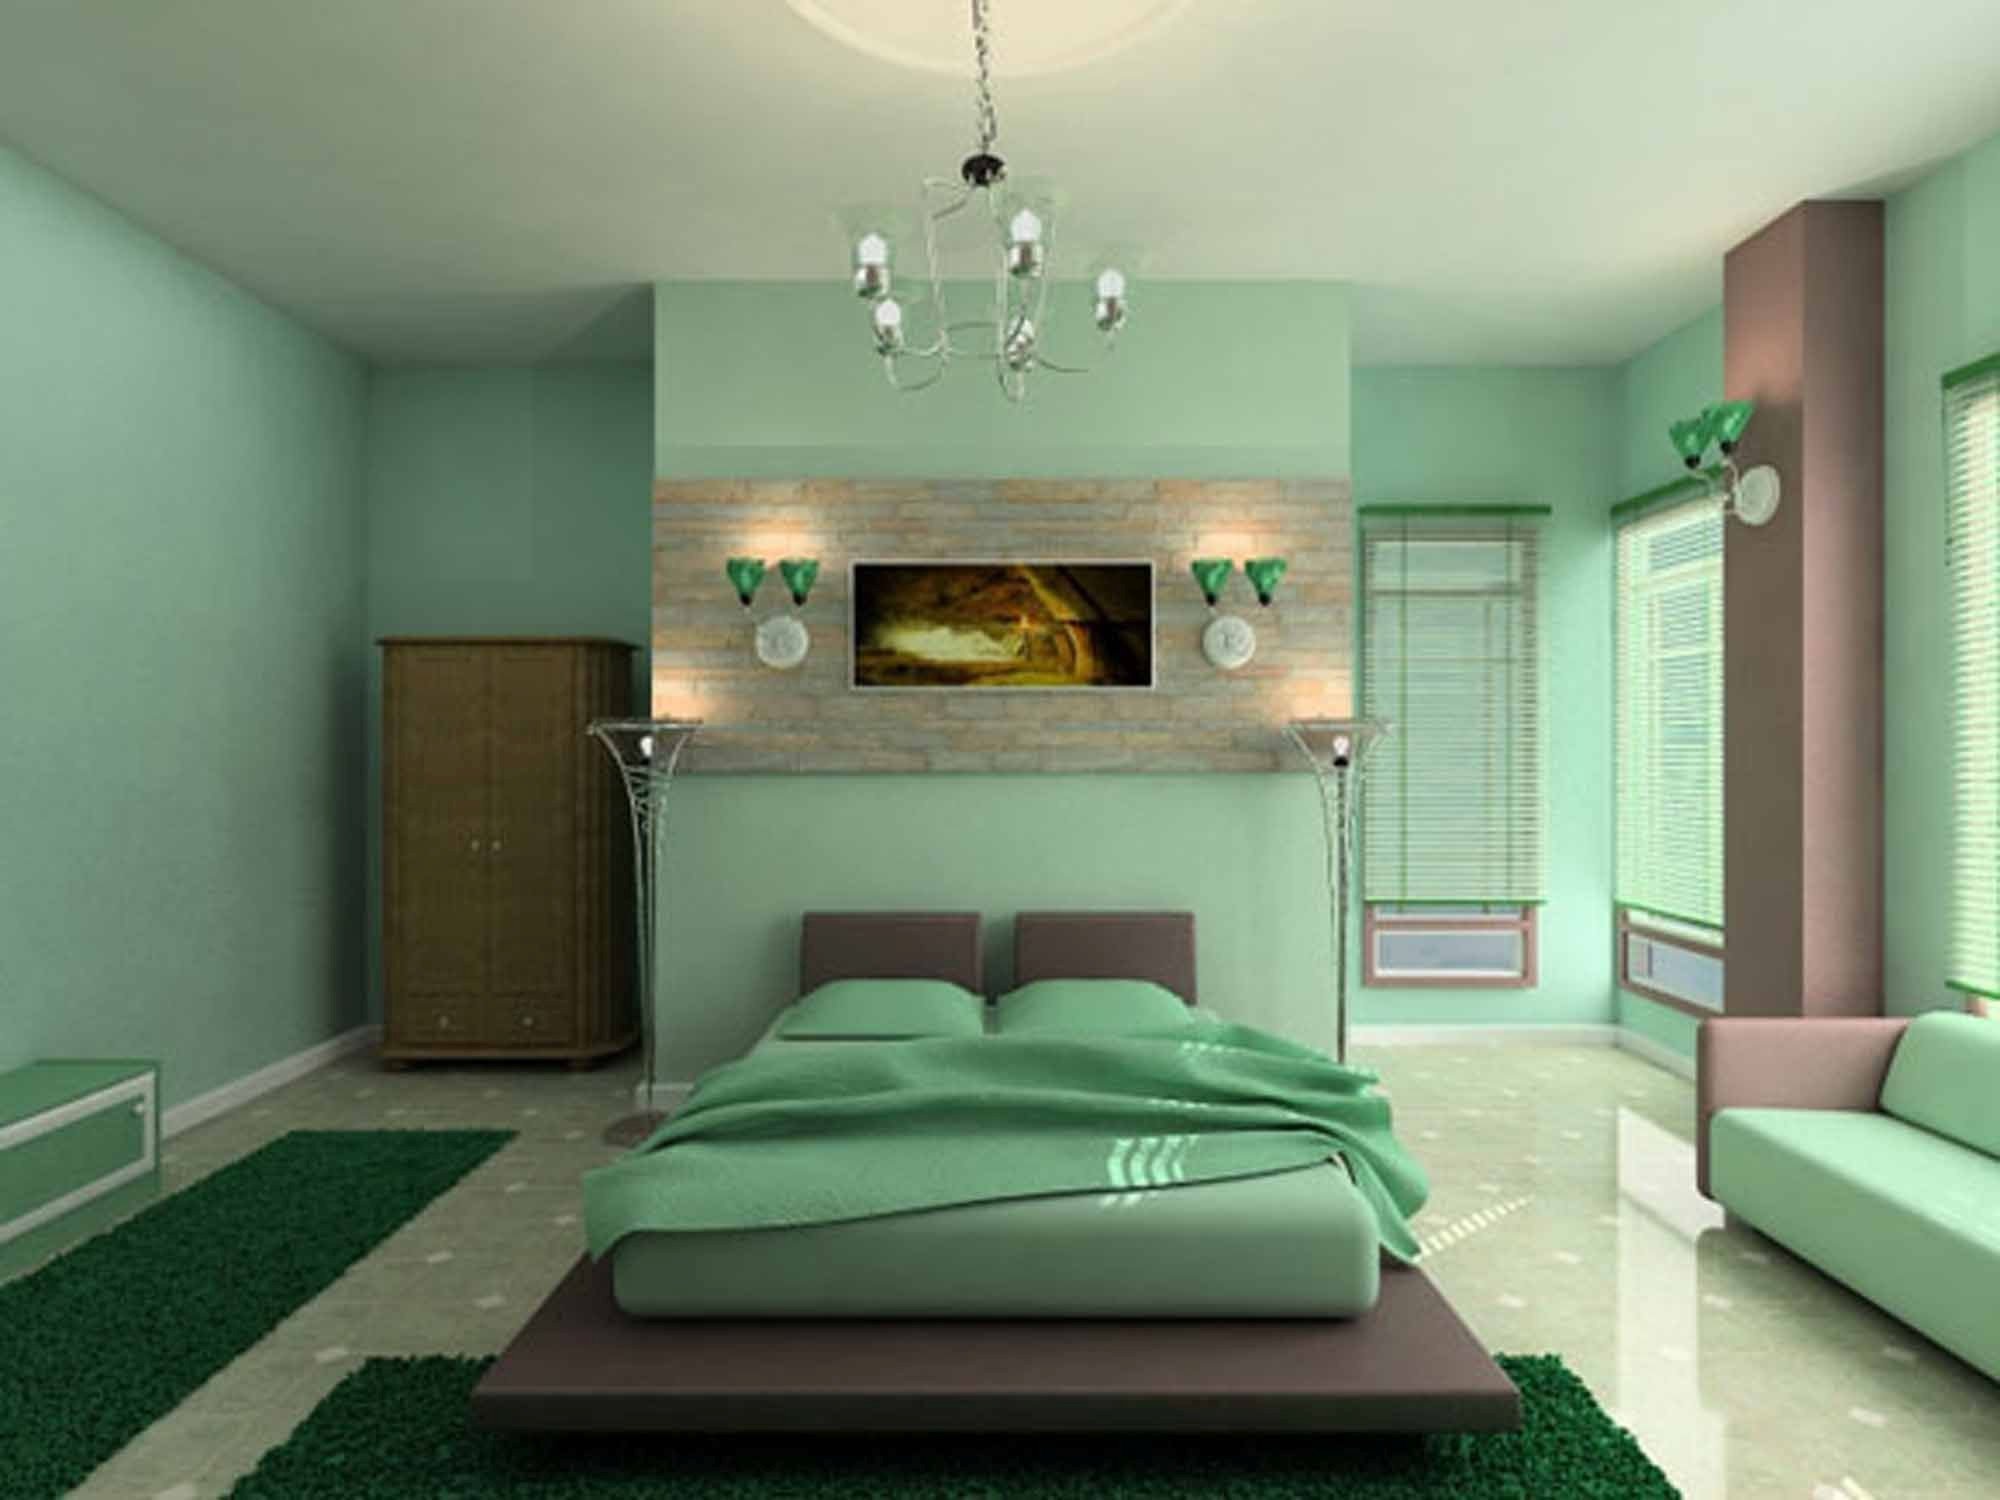 White Bedding And Light Green Walls